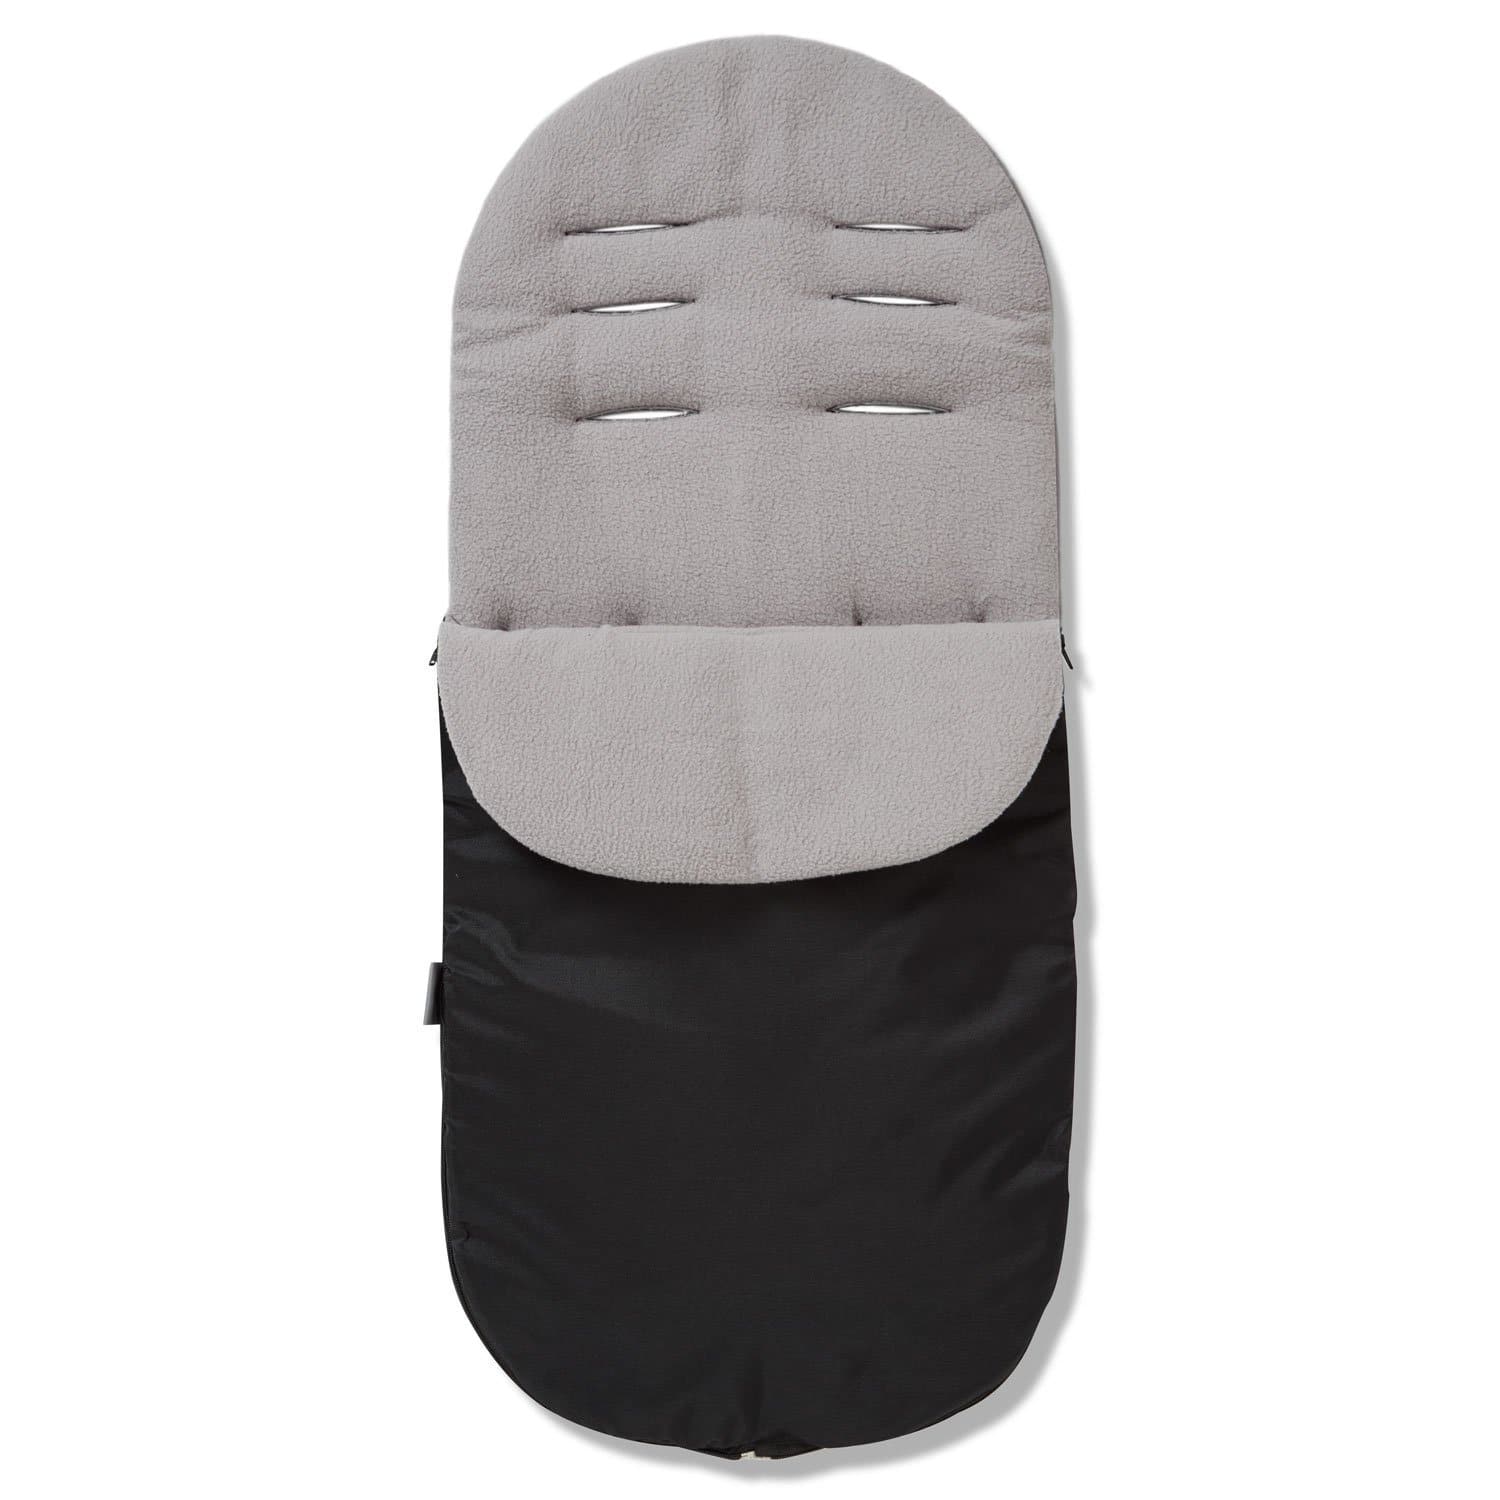 Footmuff / Cosy Toes Compatible with Quinny - Grey / Fits All Models | For Your Little One